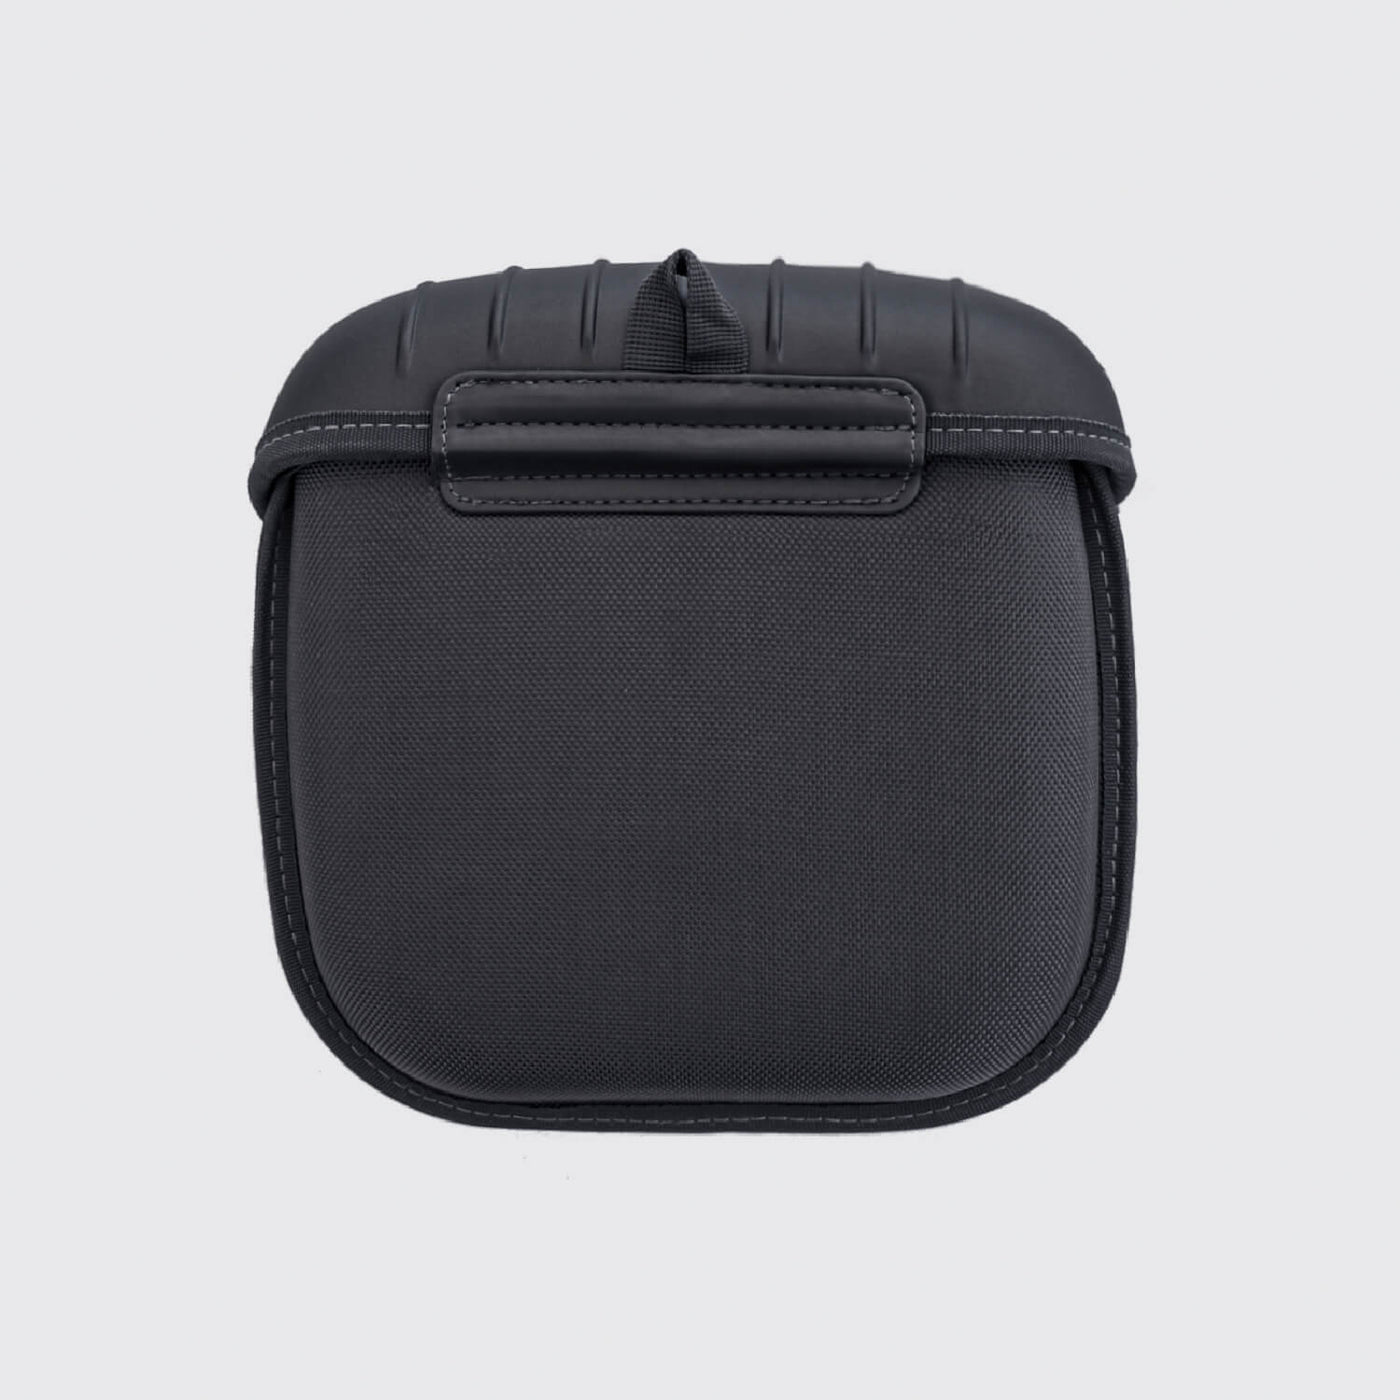 Smartform case for Apple AirPods Max against white background showing back of case